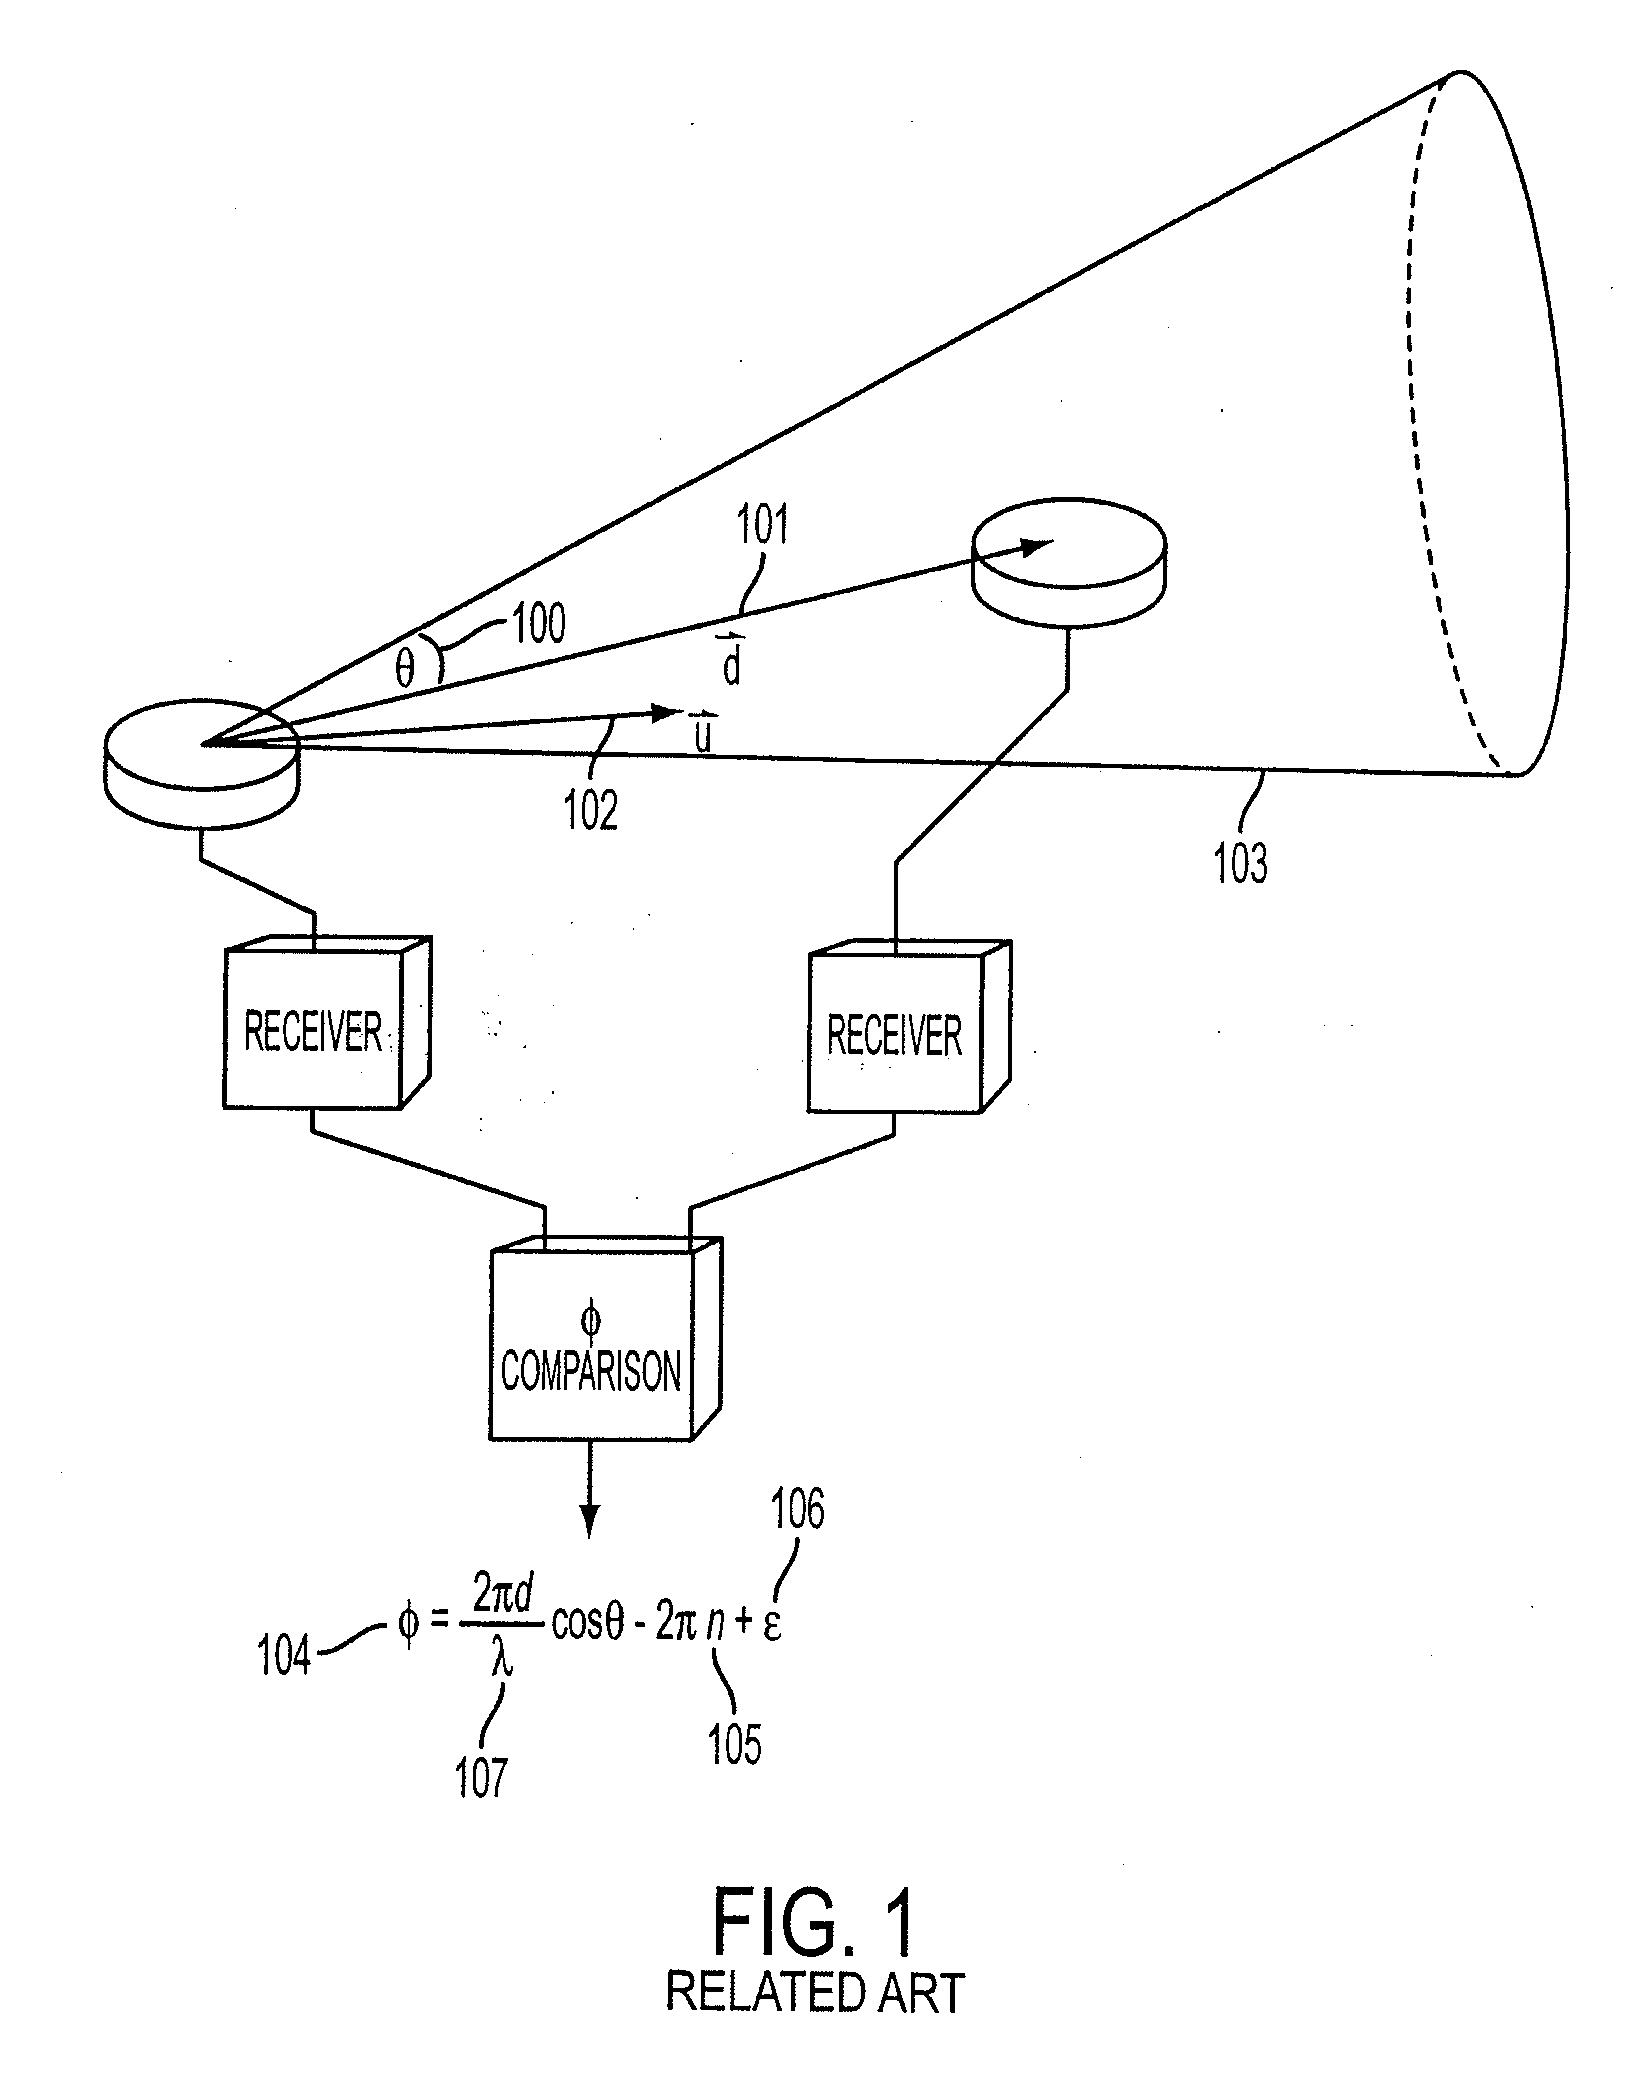 Method for single satellite geolocation of emitters using an ambiguous interferometer array